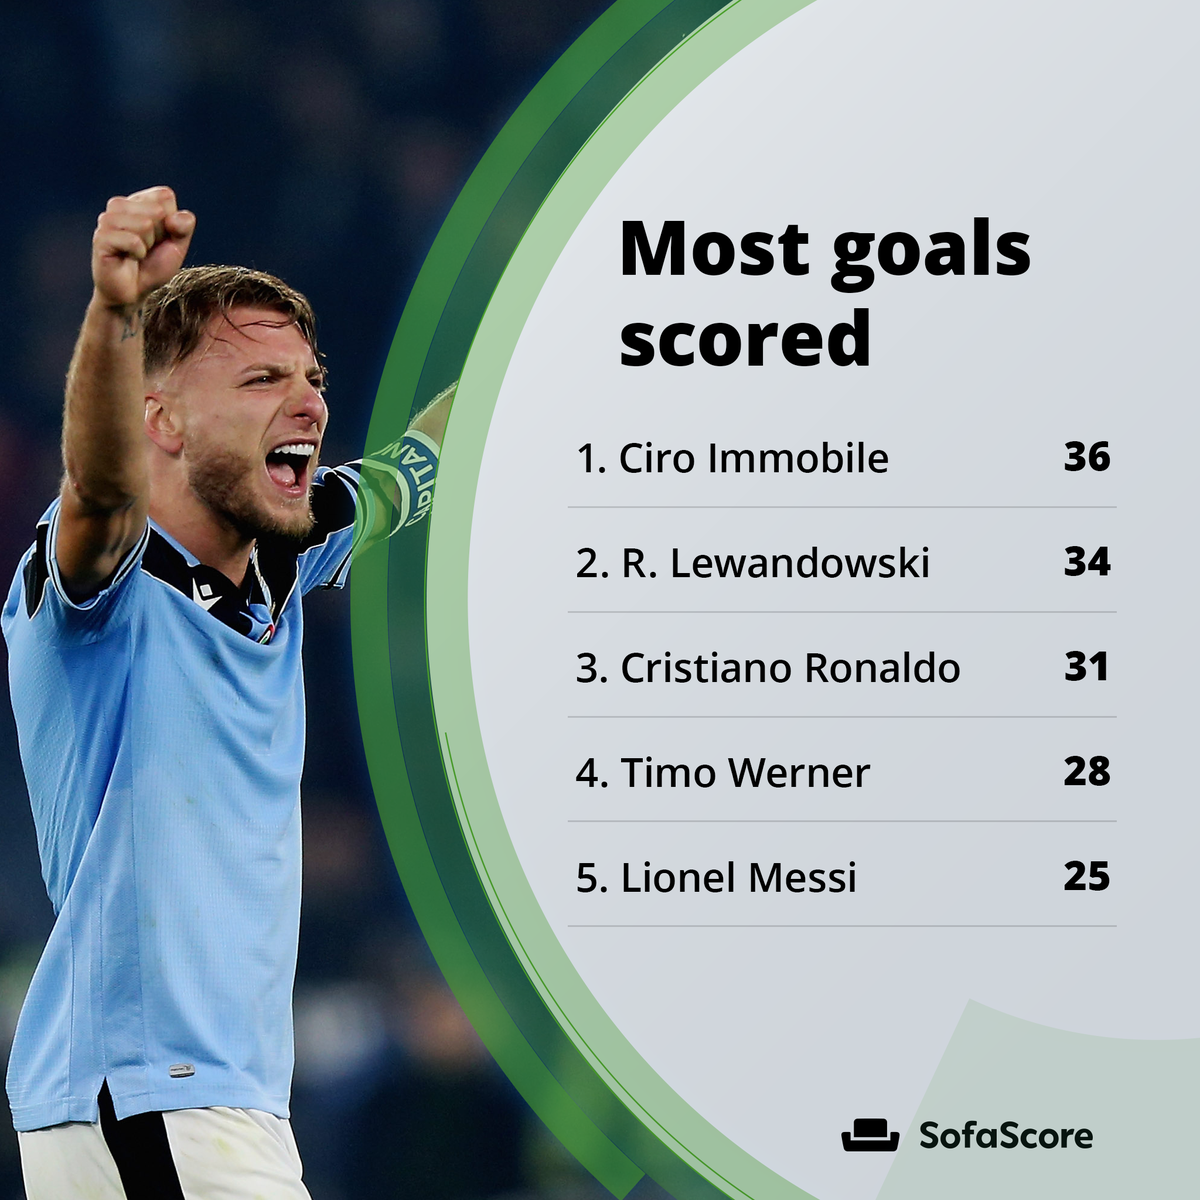 Ciro Immobile's fantastic season earned him the title of Europe's top marksman, as he edged out Robert Lewandowski after scoring 5 goals in his last 3 matches.A brilliant season by Lazio's no. 17, who averaged more than a goal per 90 minutes played! 